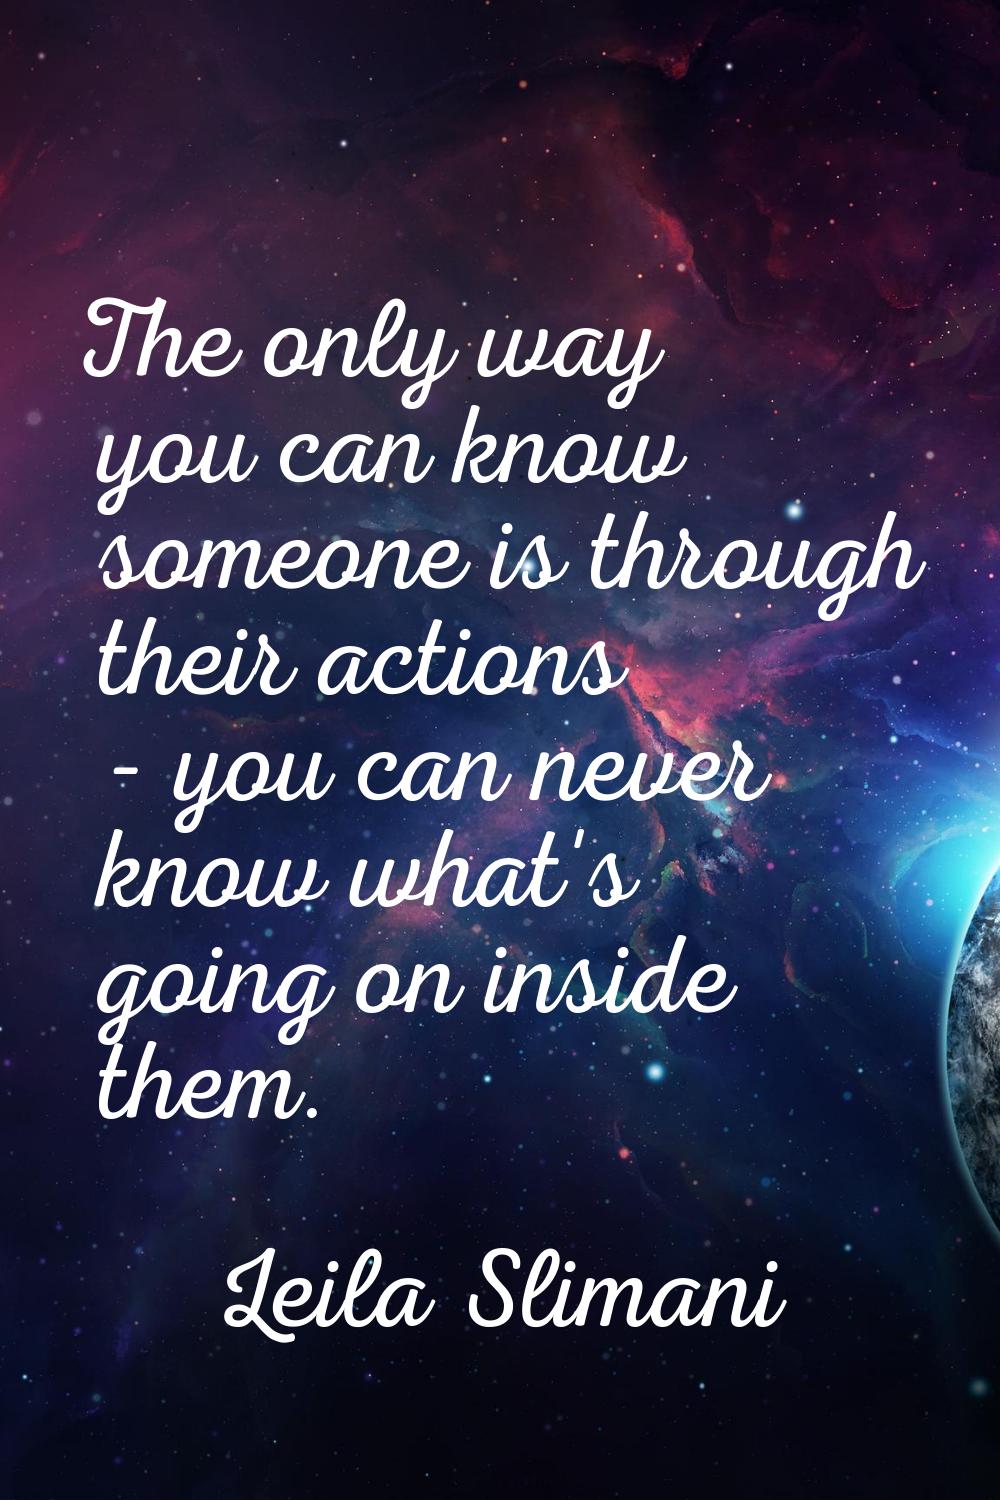 The only way you can know someone is through their actions - you can never know what's going on ins